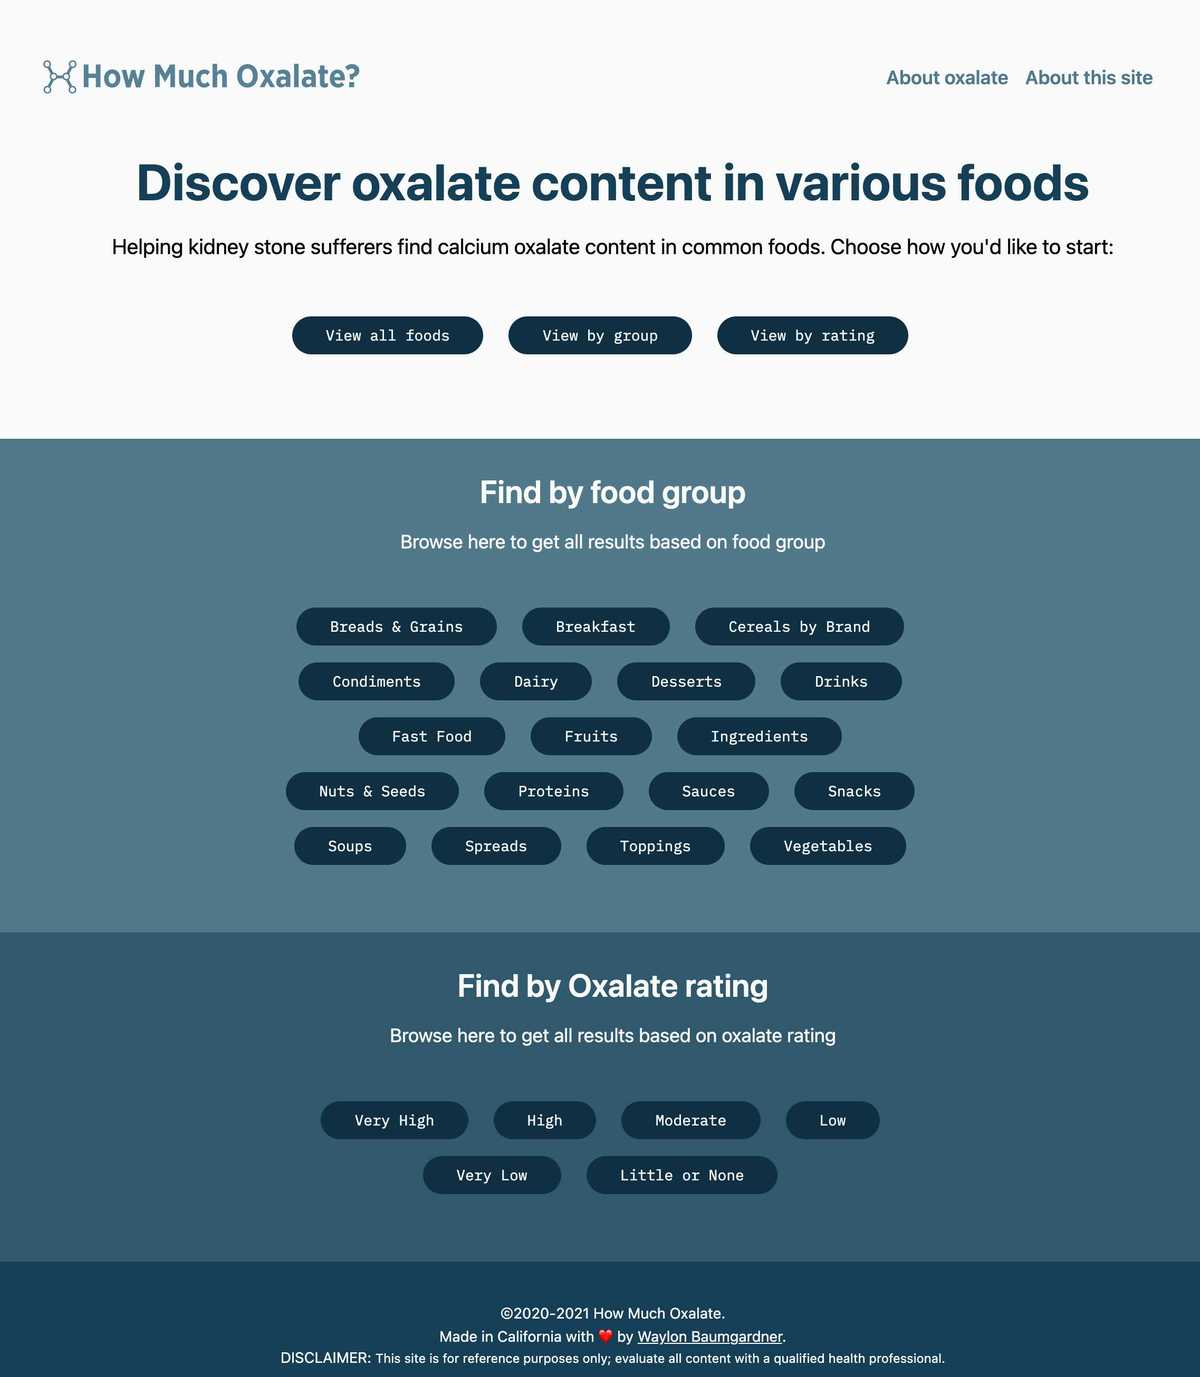 Screenshot of the How Much Oxalate website; white background with teal foreground colors and a grid of button options